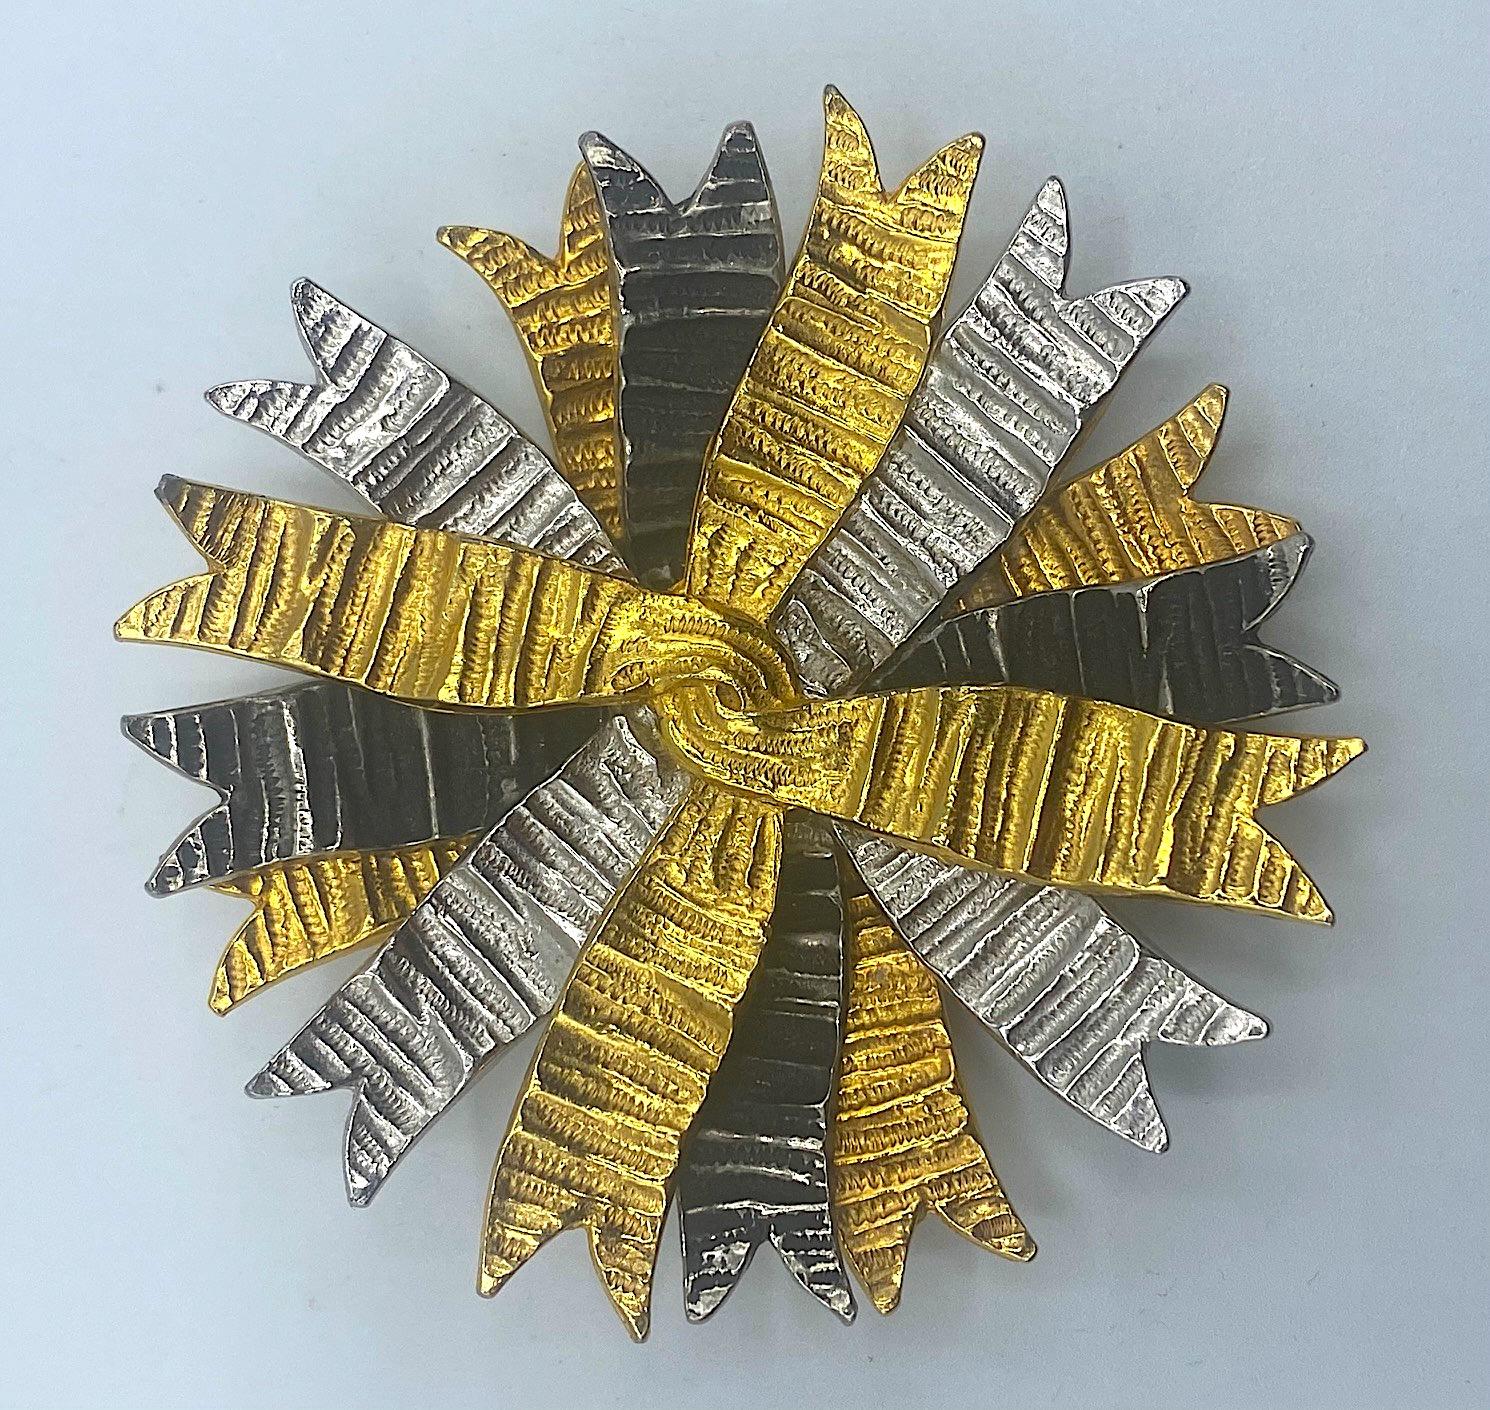 This DeNicola brooch is meticulously cast and executed. It is comprised of four layers of cast rippling and twisted ribbon in gold plate, silver plate and patinated charcoal black finish. The brooch is a complex and time consuming piece to produce